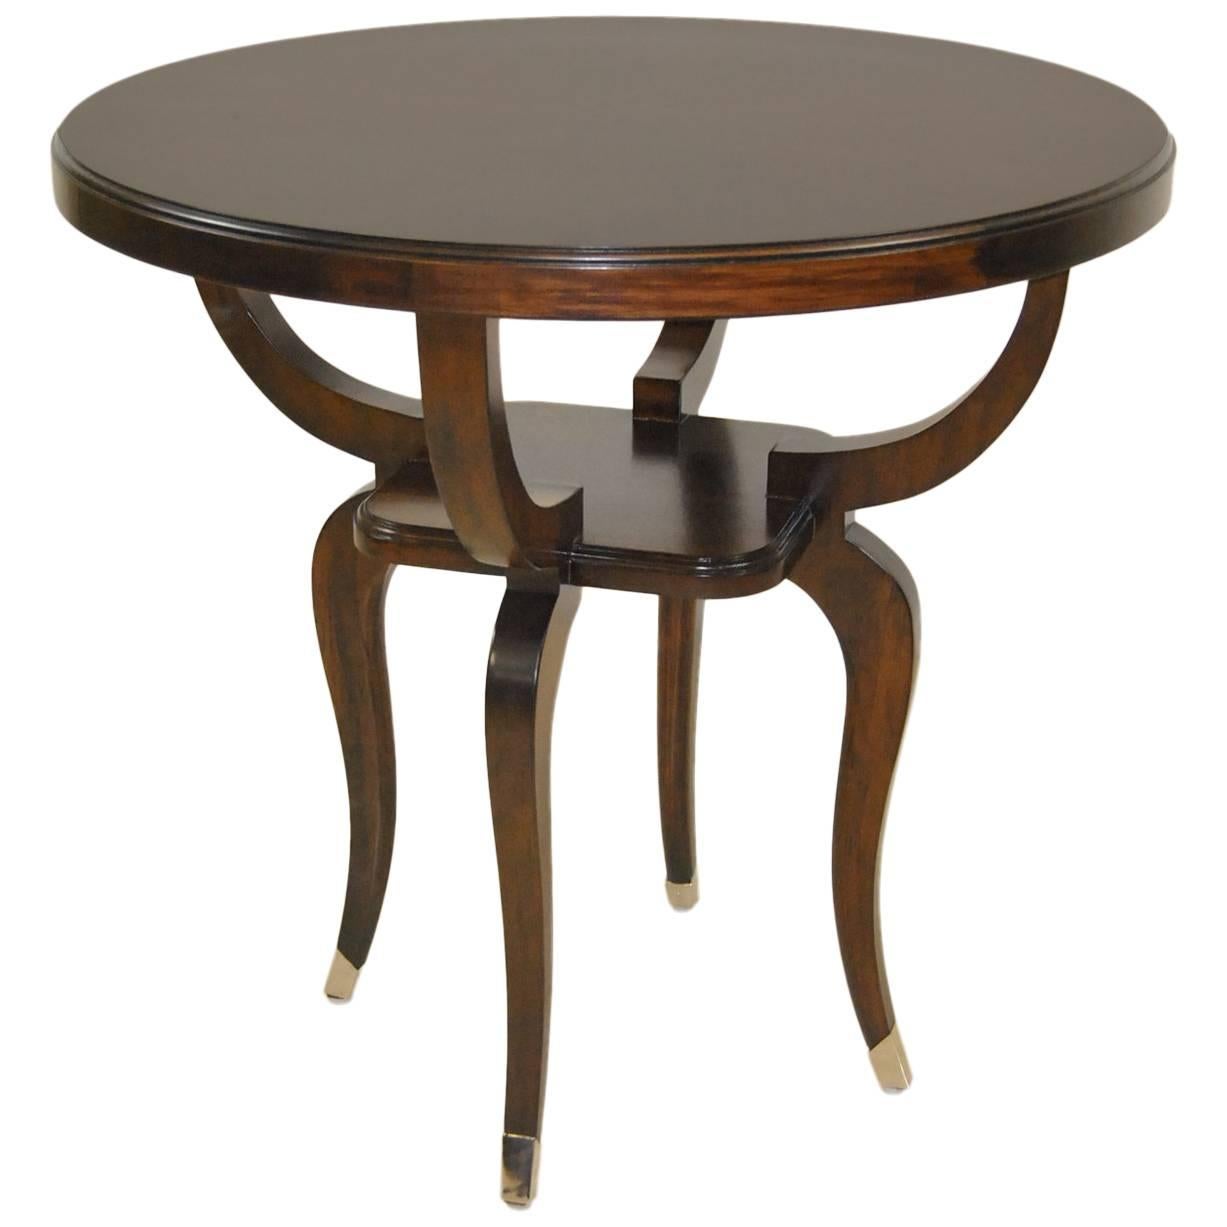 Walnut Parisian End Table with Inlaid Top by Robb & Stucky For Sale